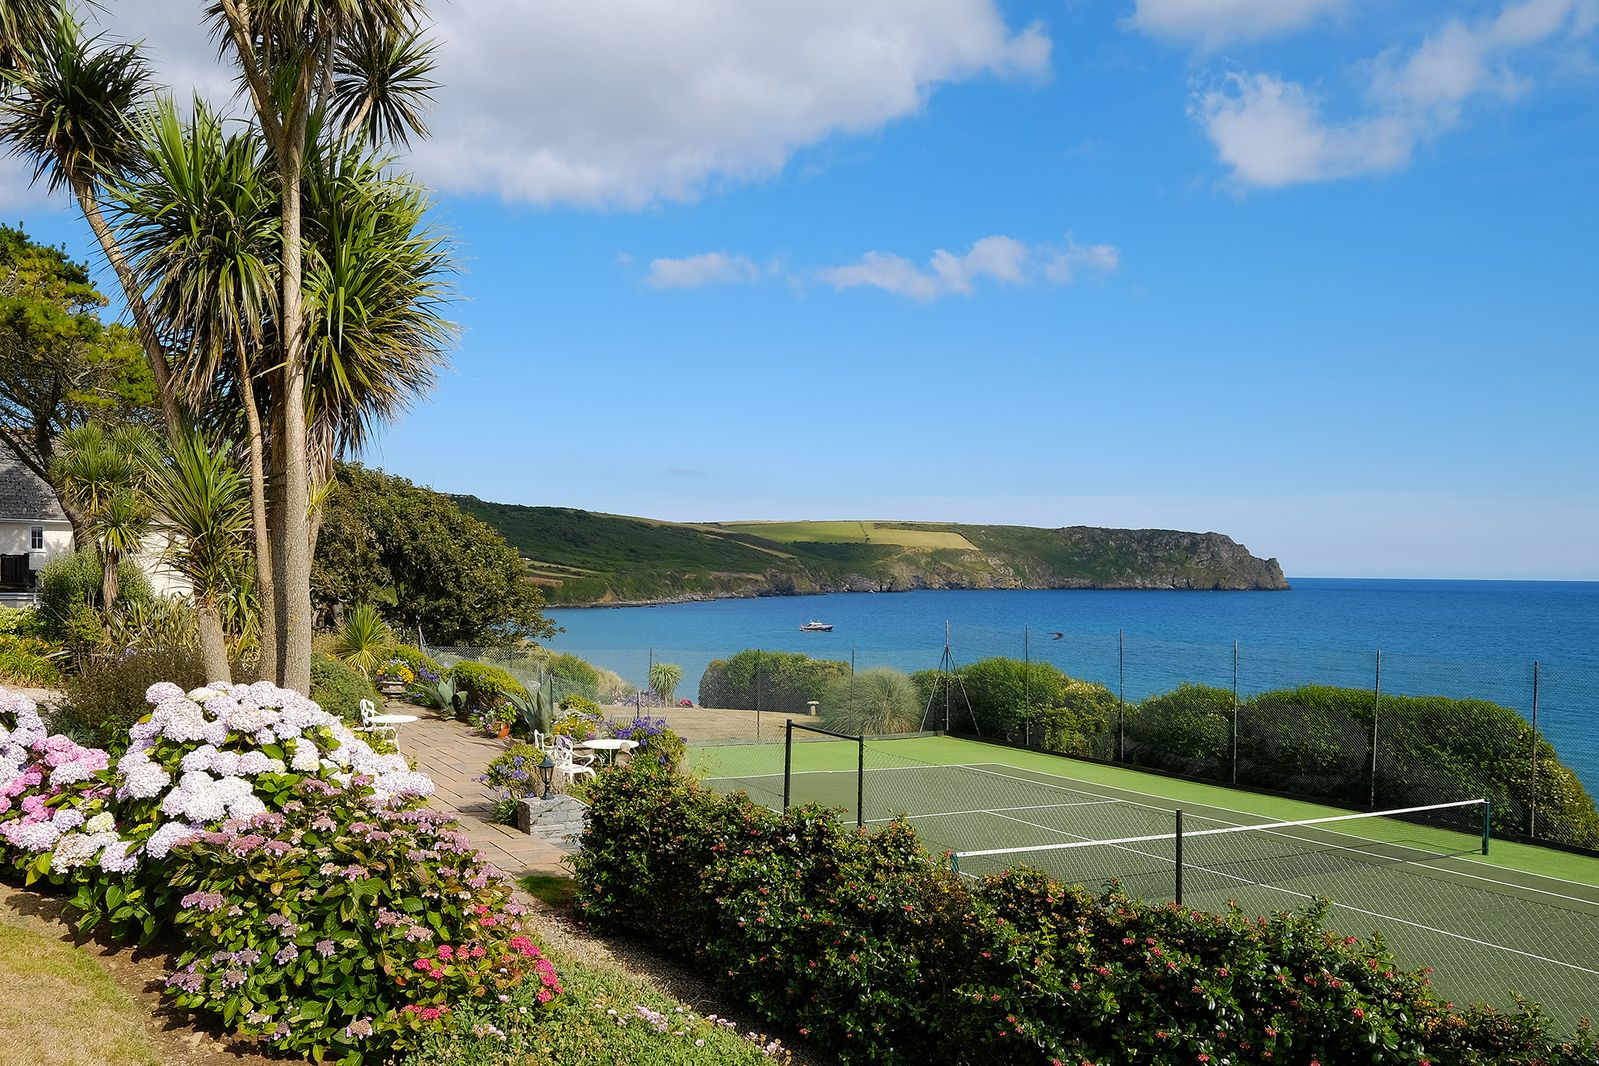 Hotels with tennis courts in Cornwall